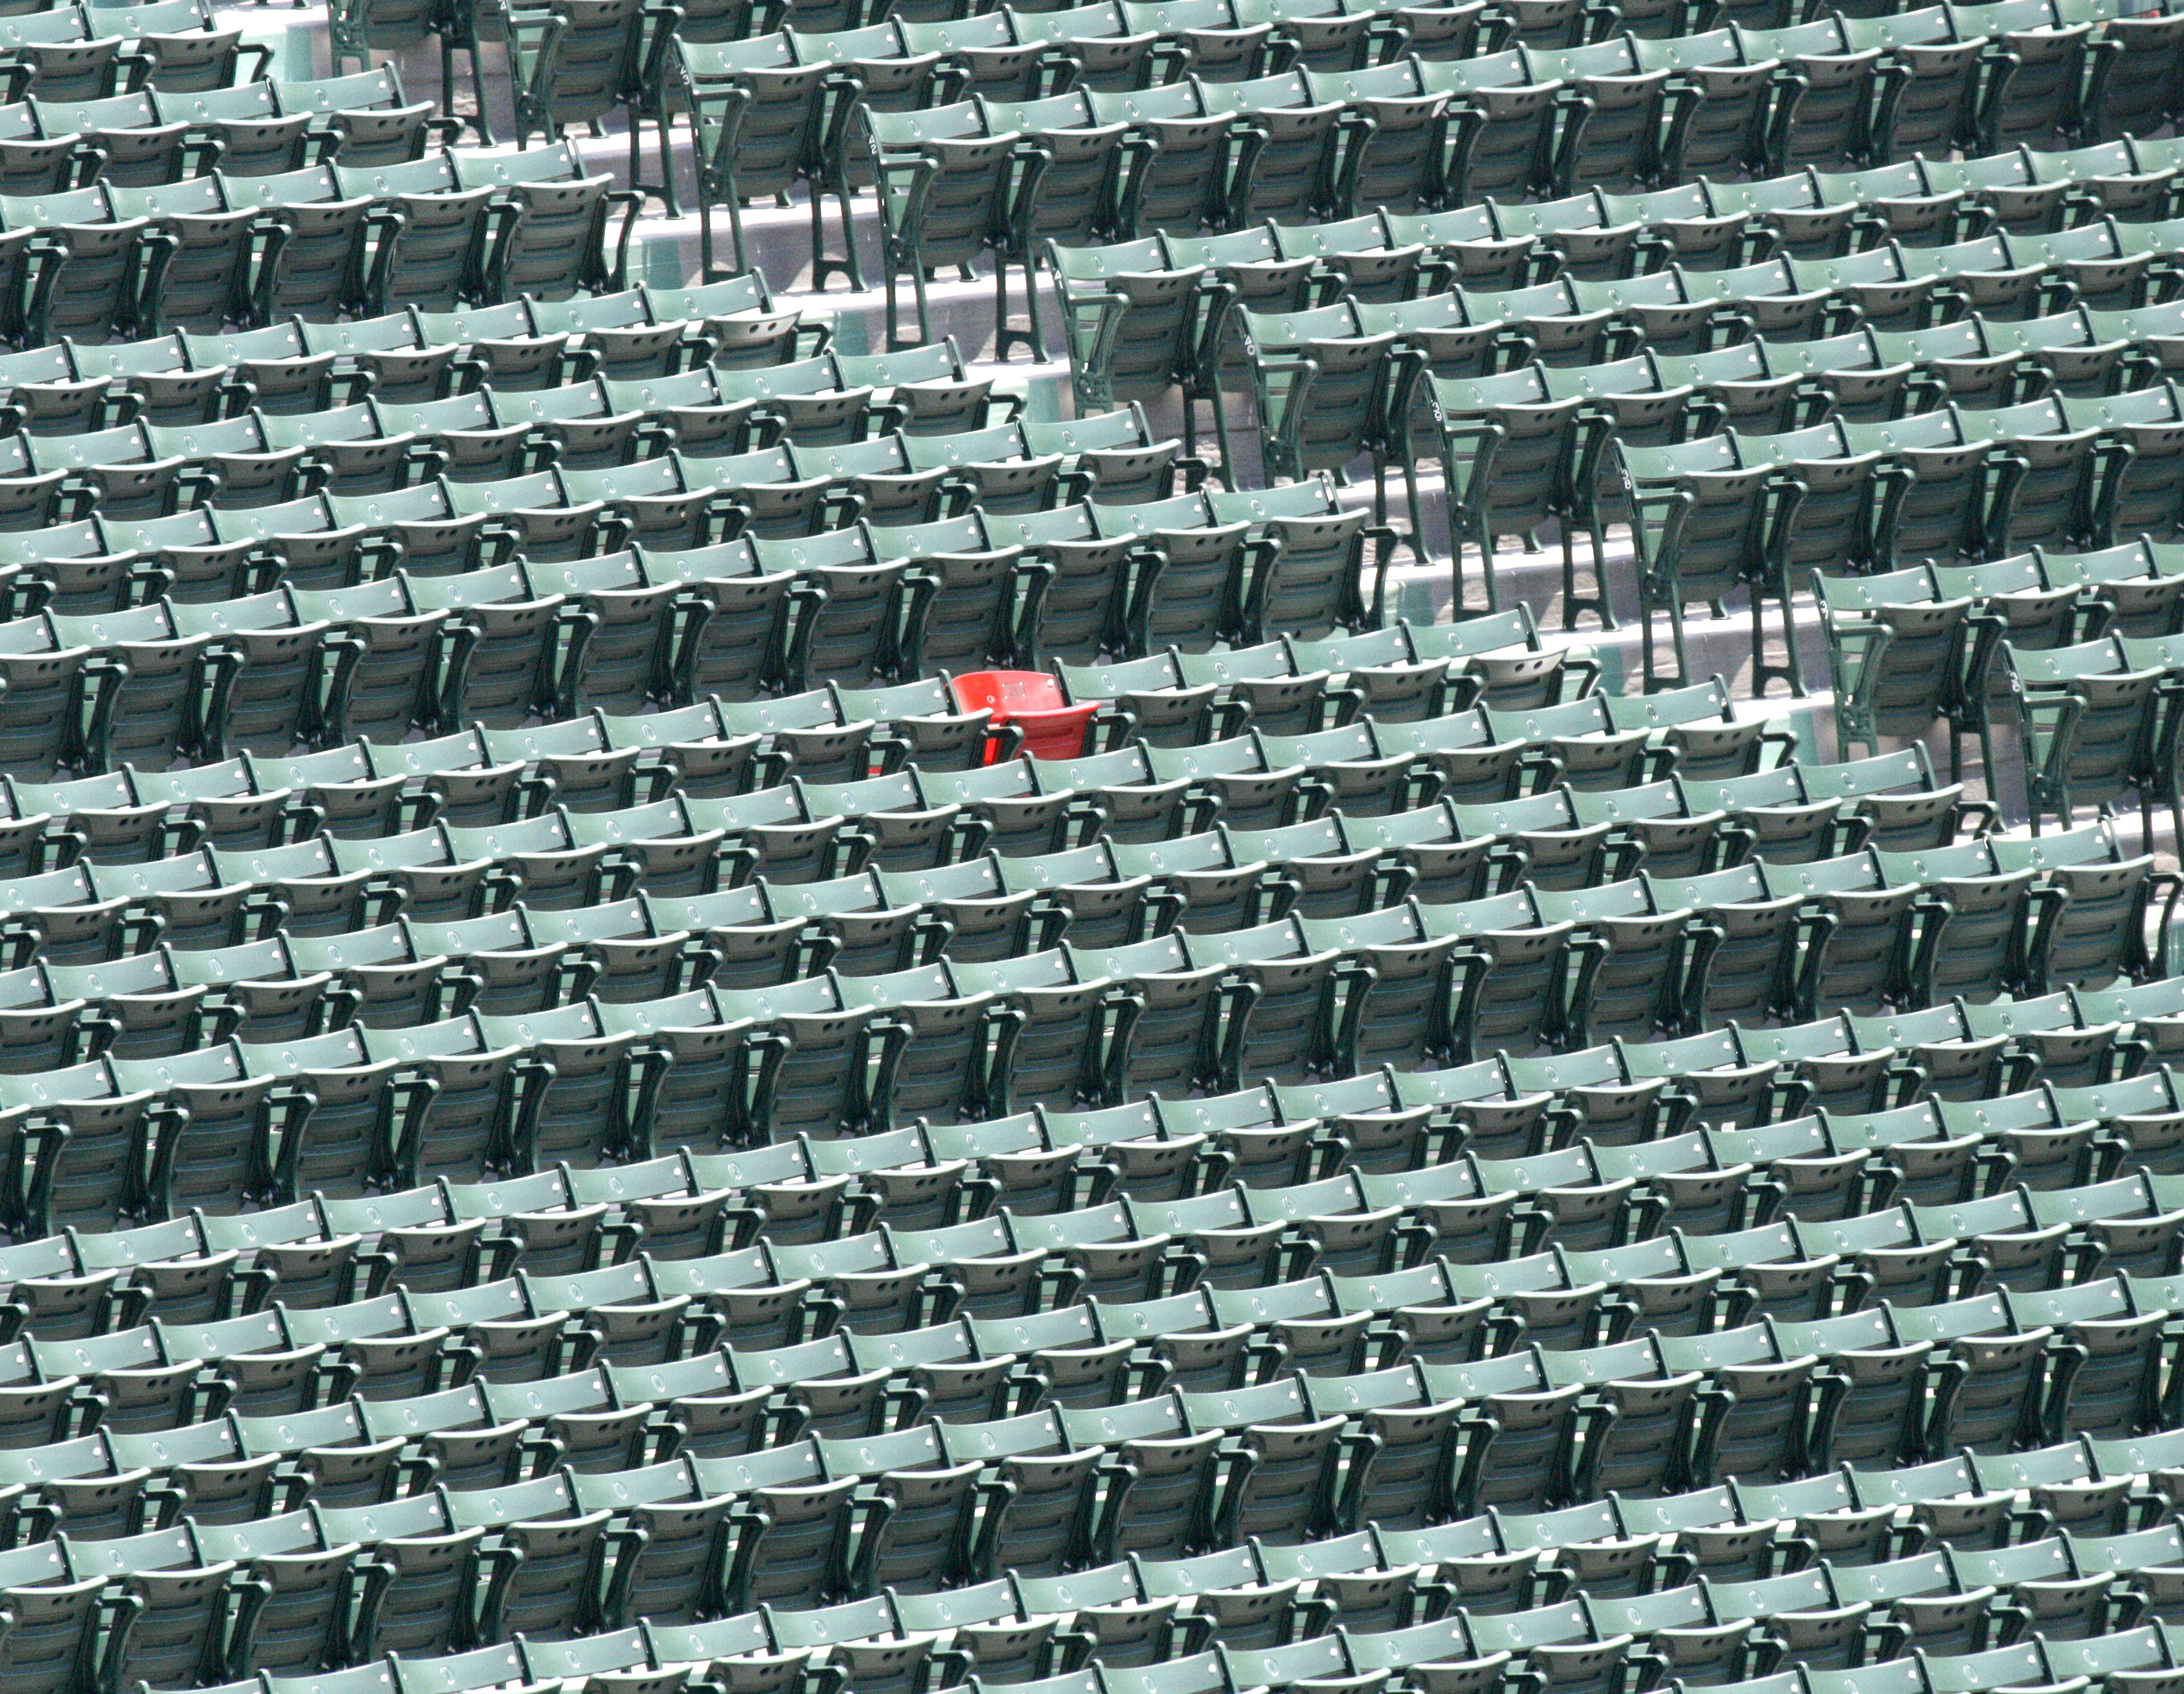 File:Fenway Parks Lone Red Seat (2630316084).jpg - Wikimedia Commons